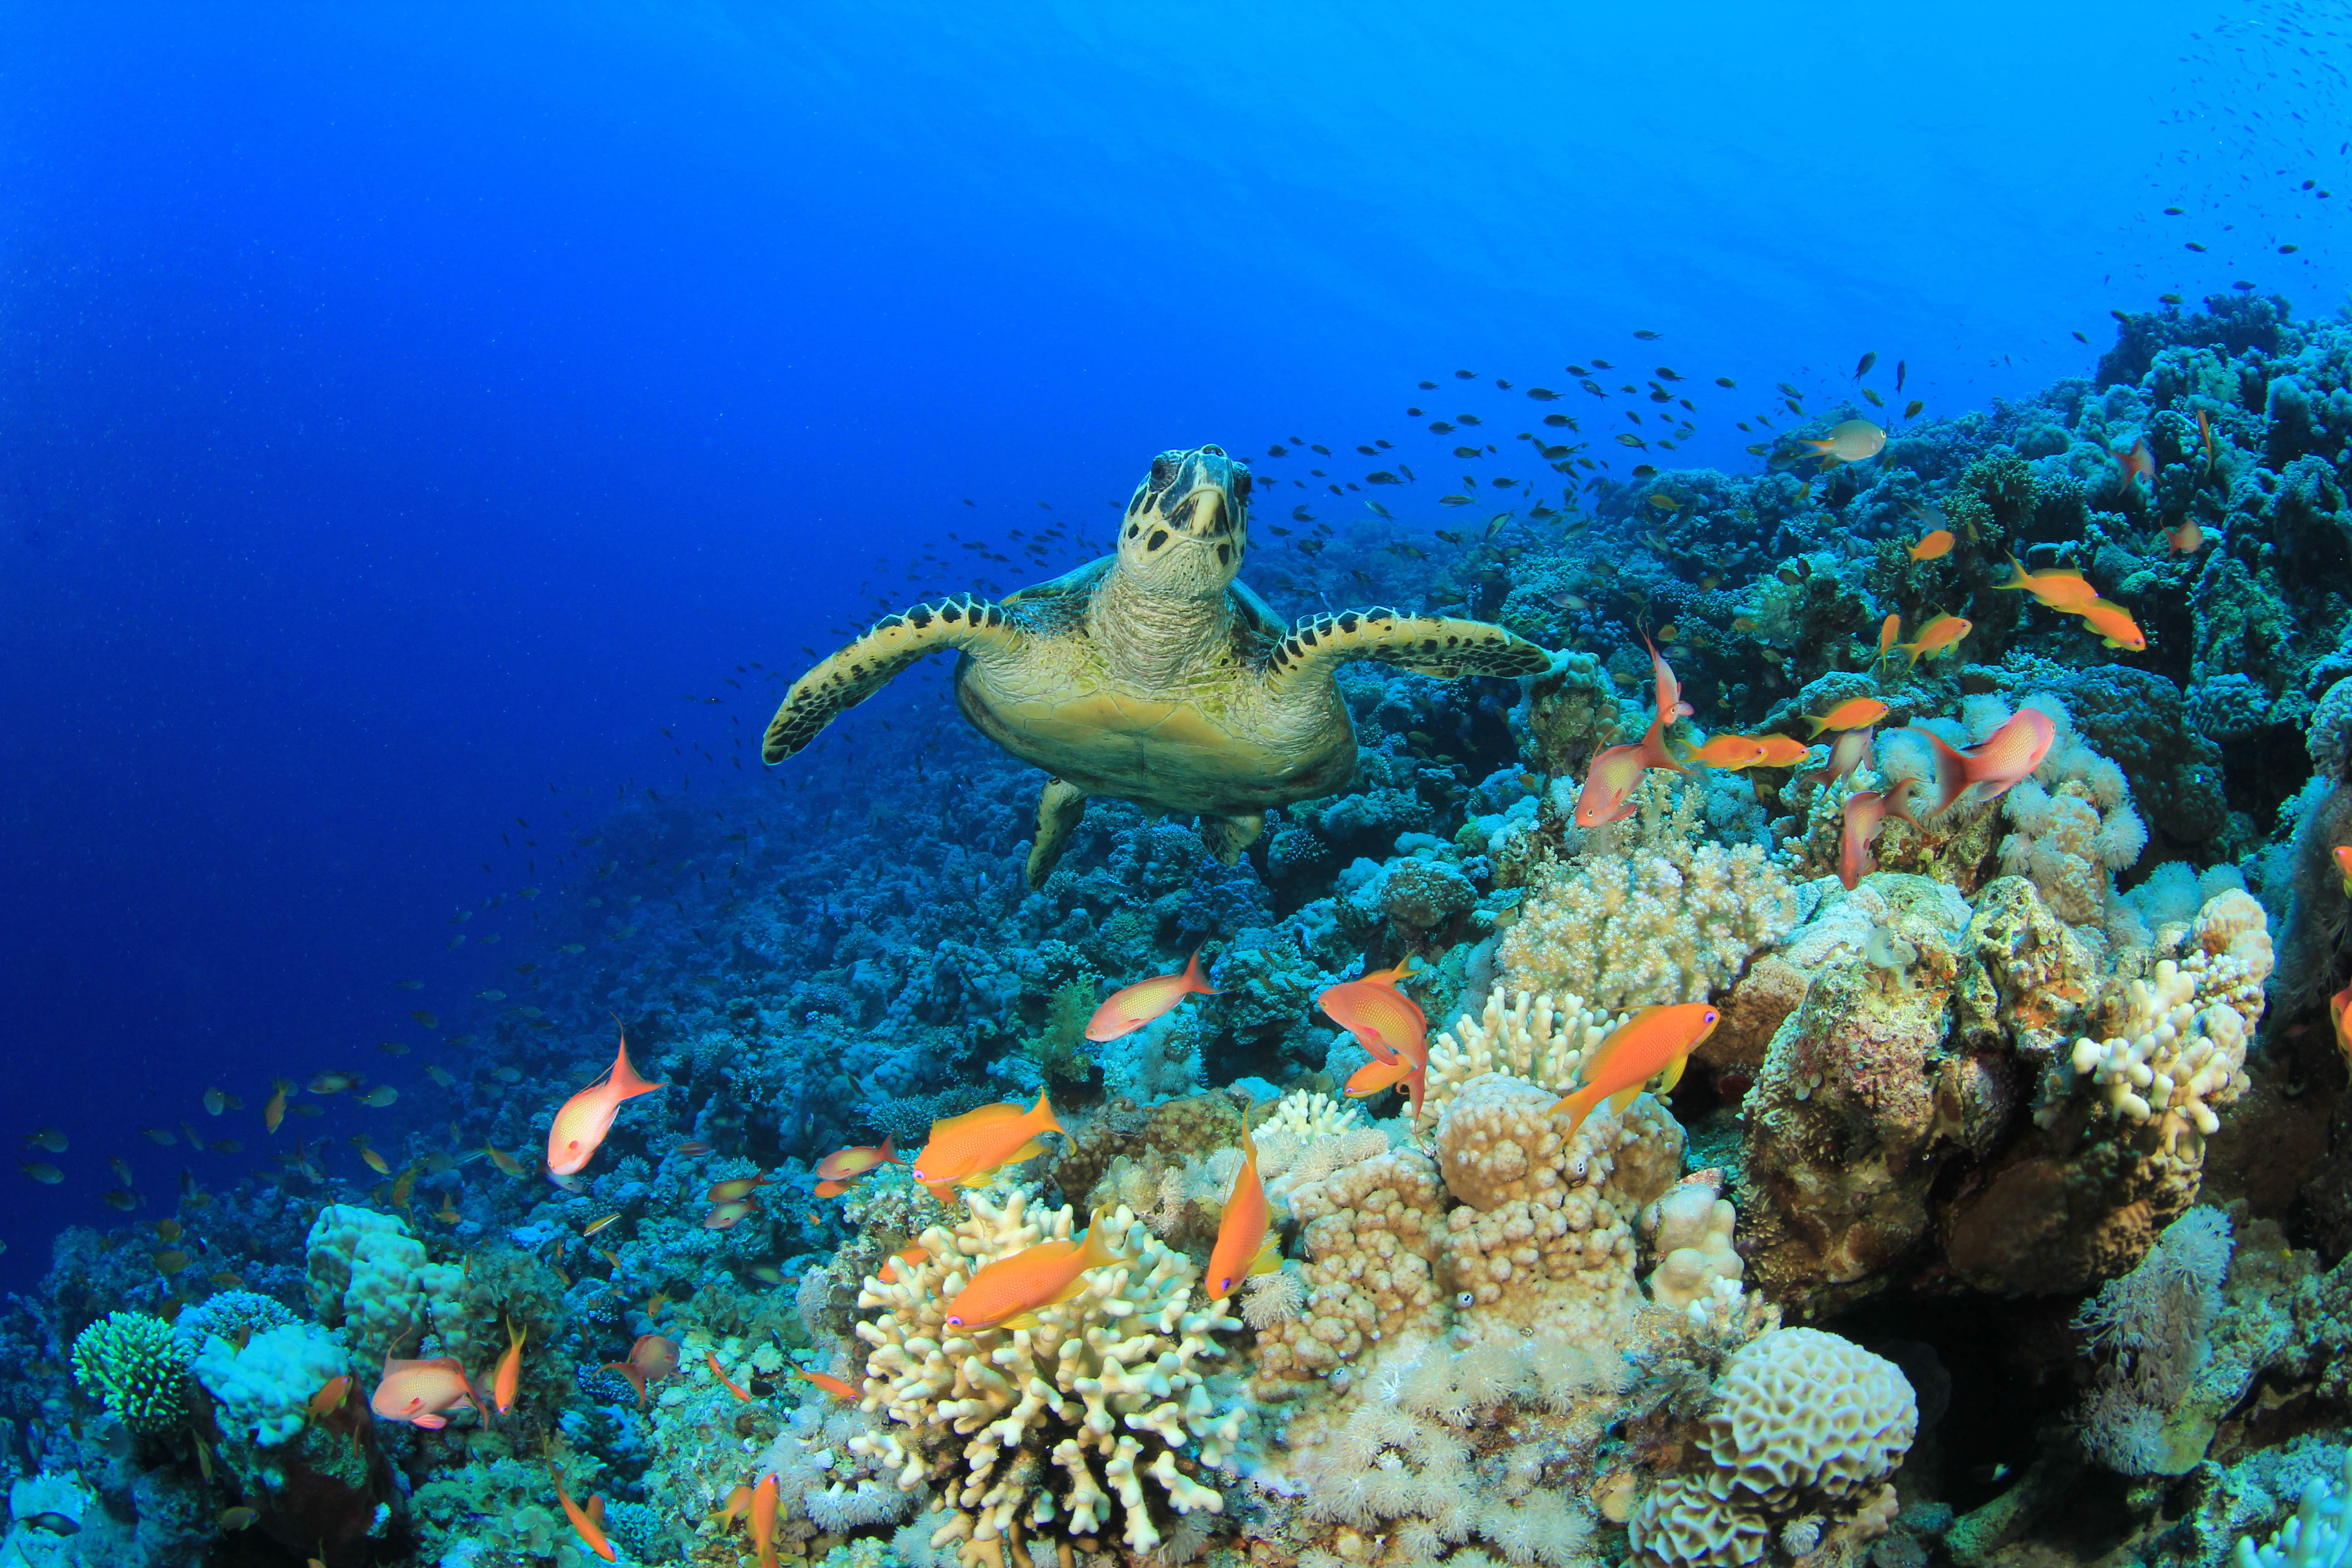 Turtle swimming among coral reefs in one of Abu Dhabi's Marine Protected Areas